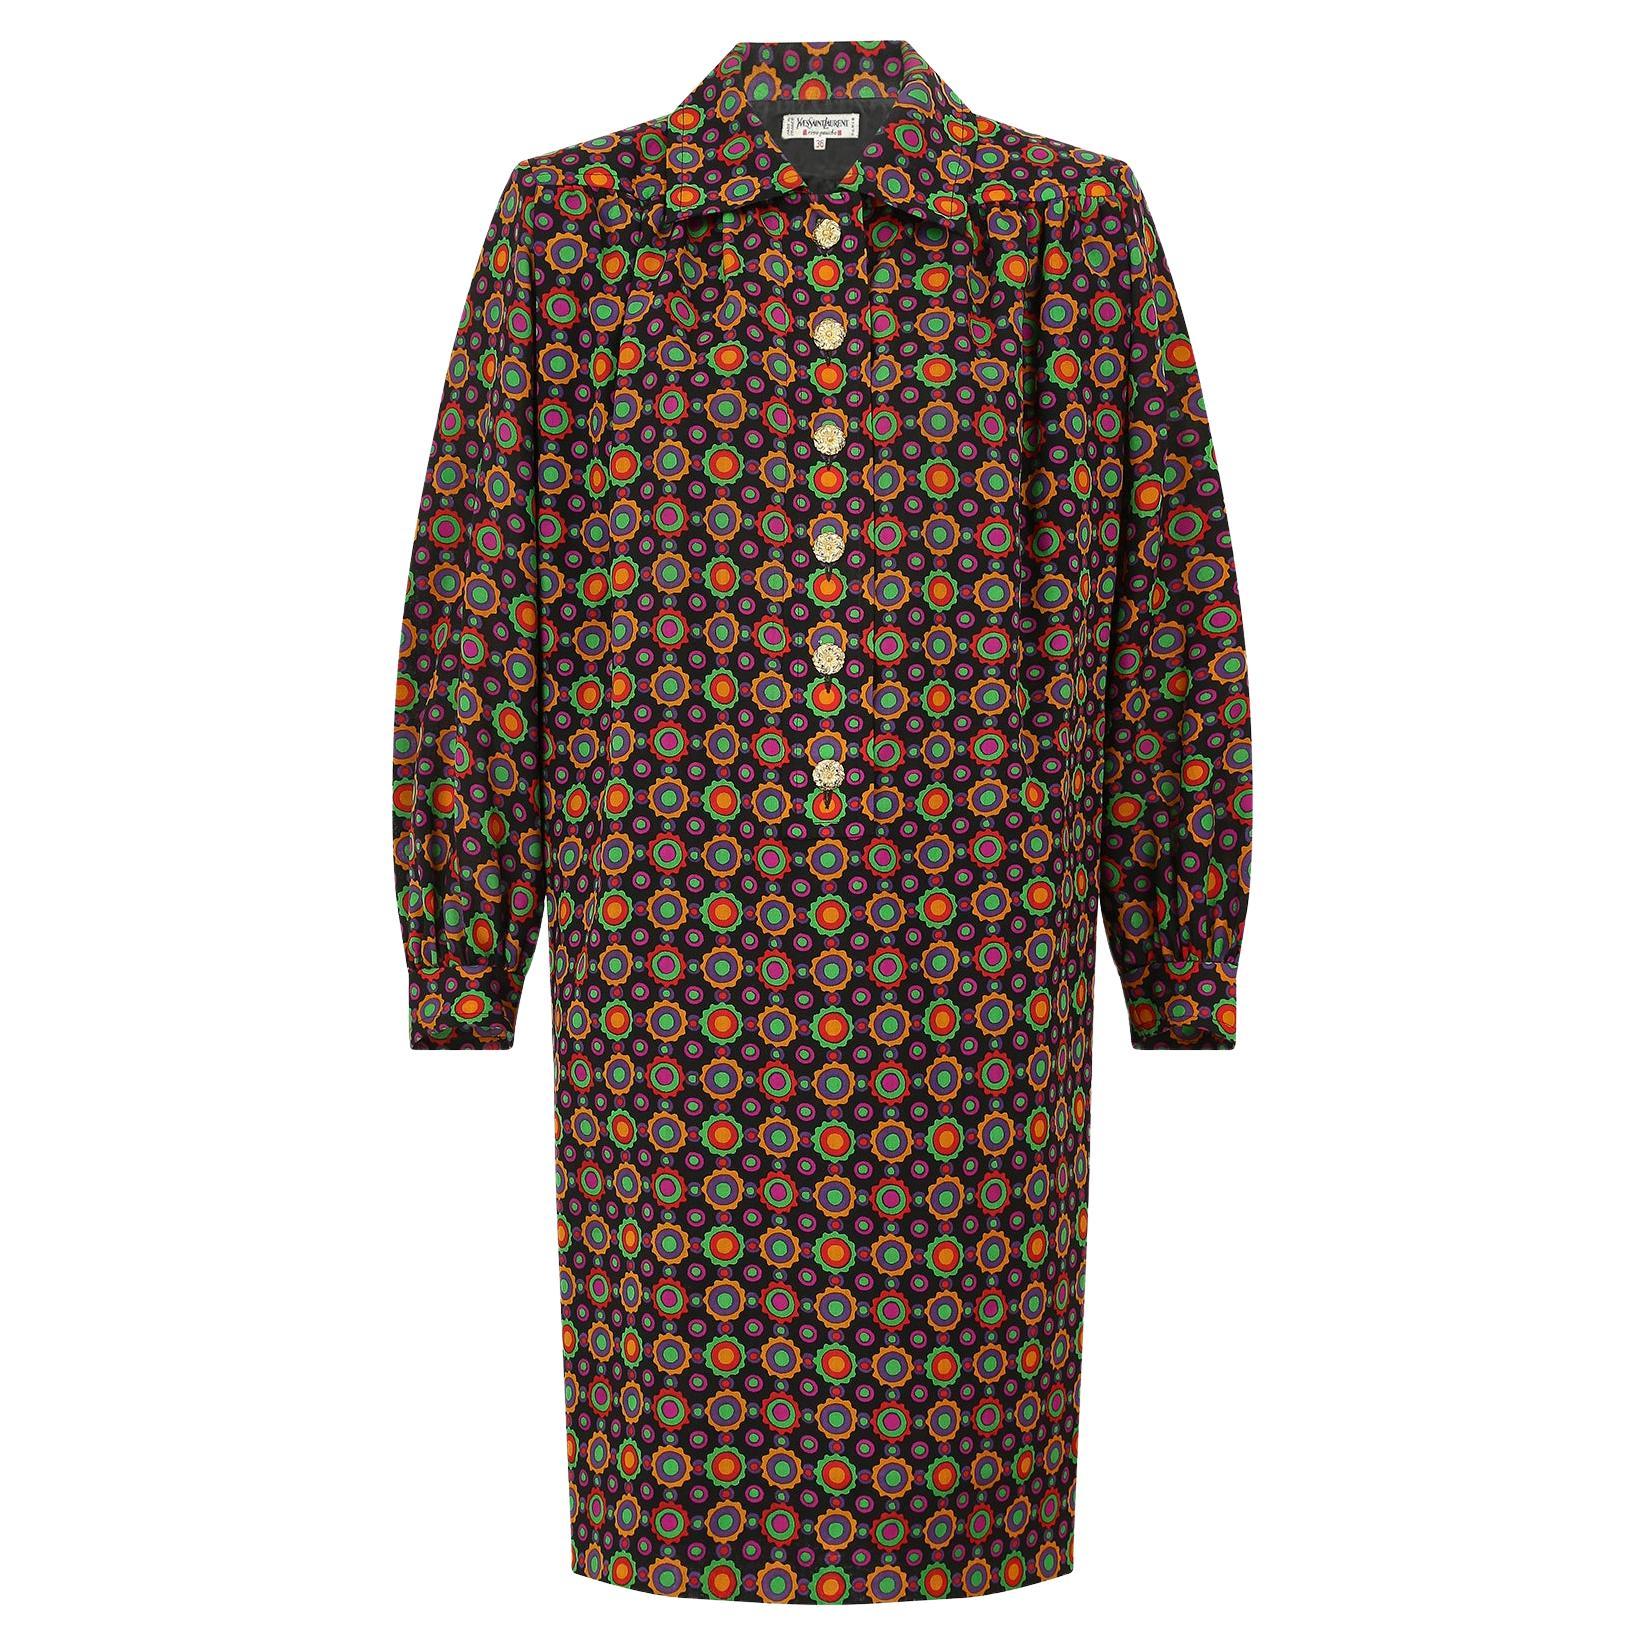 1990 Yves Saint Laurent Colourful Abstract Print Shirtwaister Dress For Sale